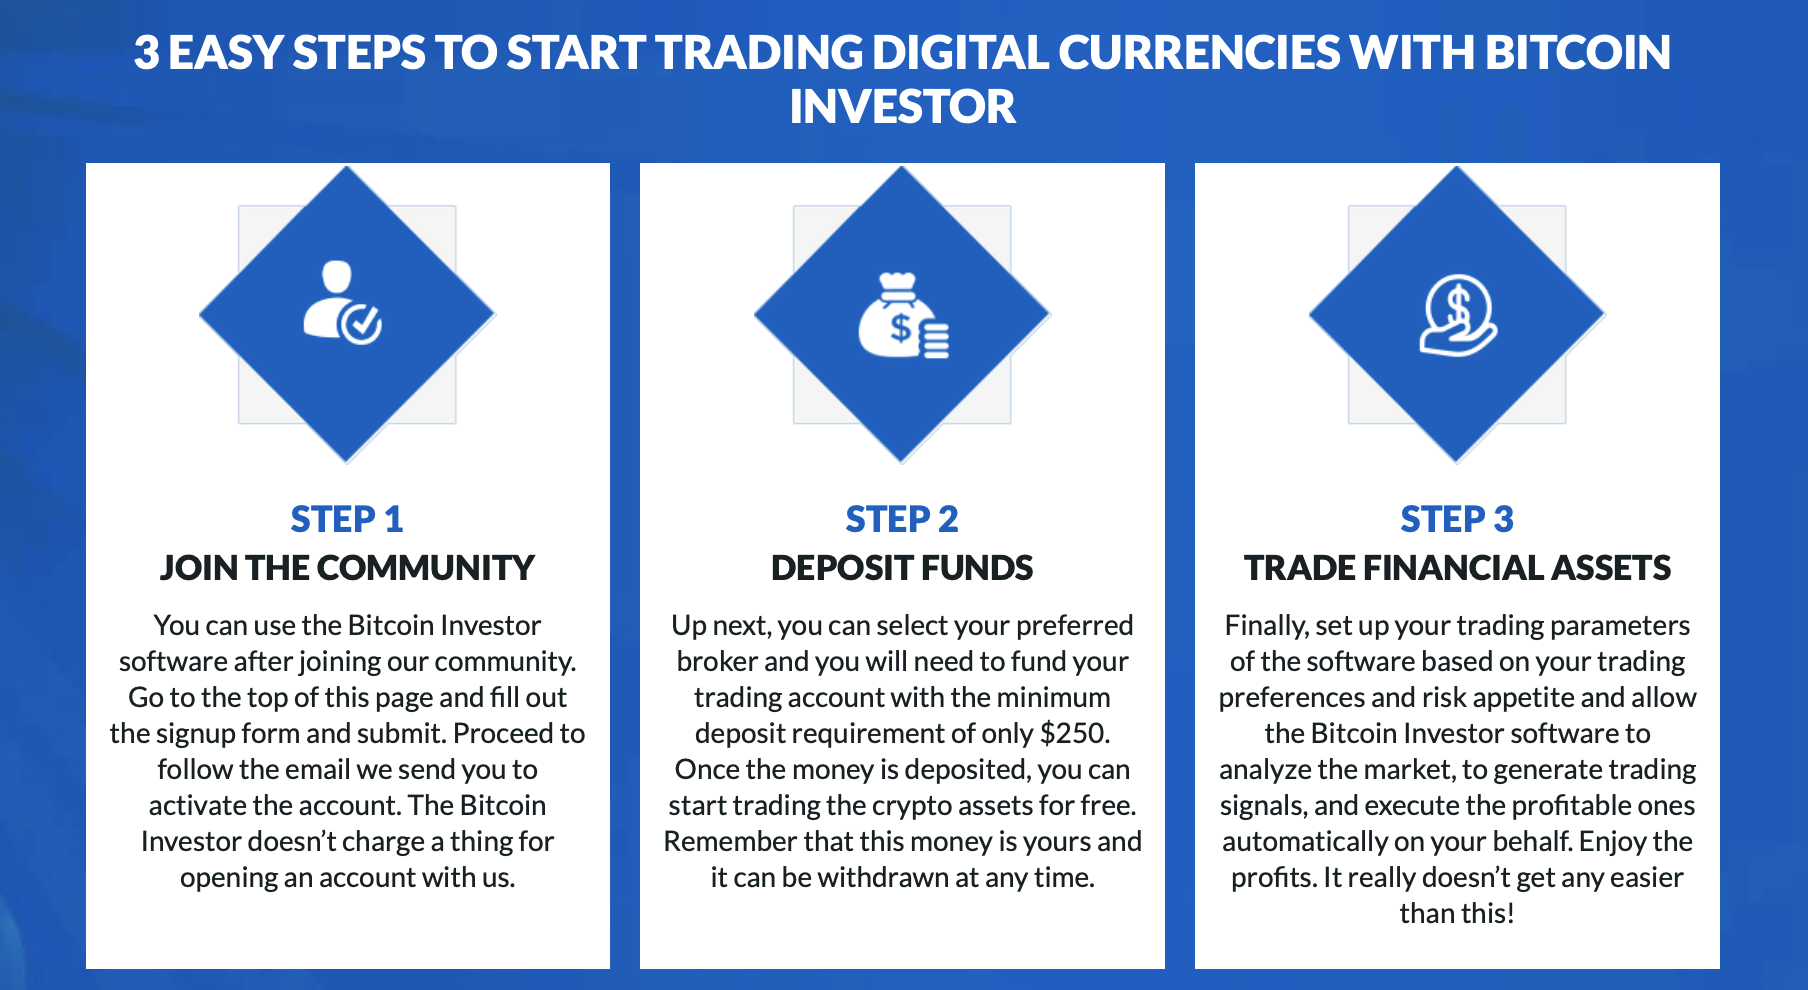 Steps to start trading with Bitcoin Investor